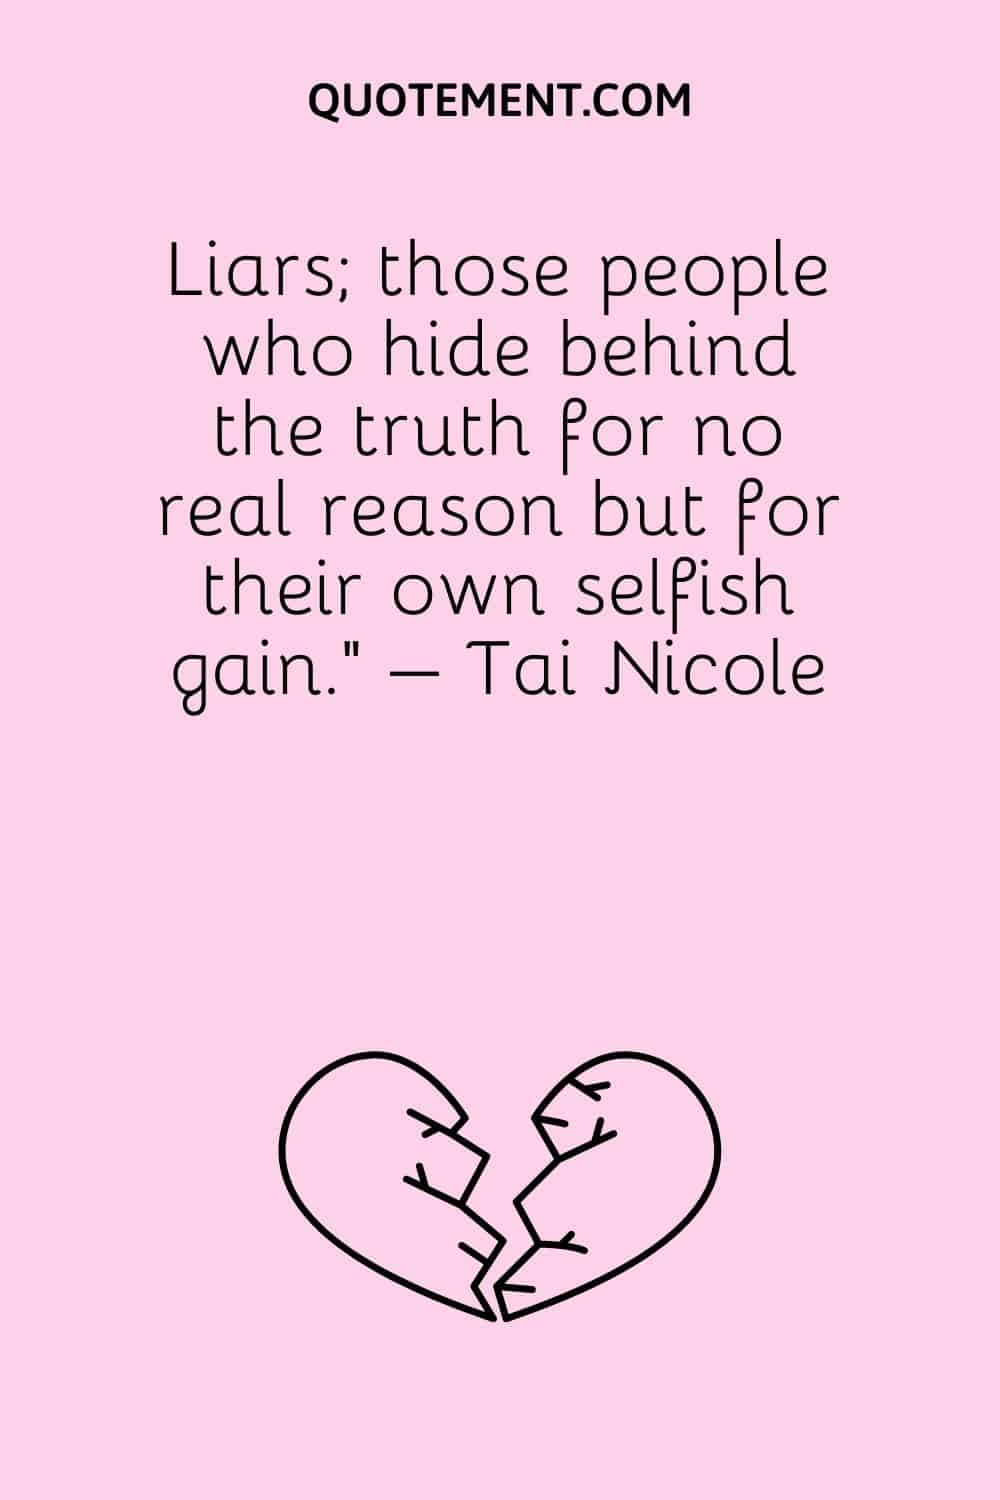 Liars; those people who hide behind the truth for no real reason but for their own selfish gain.” – Tai Nicole